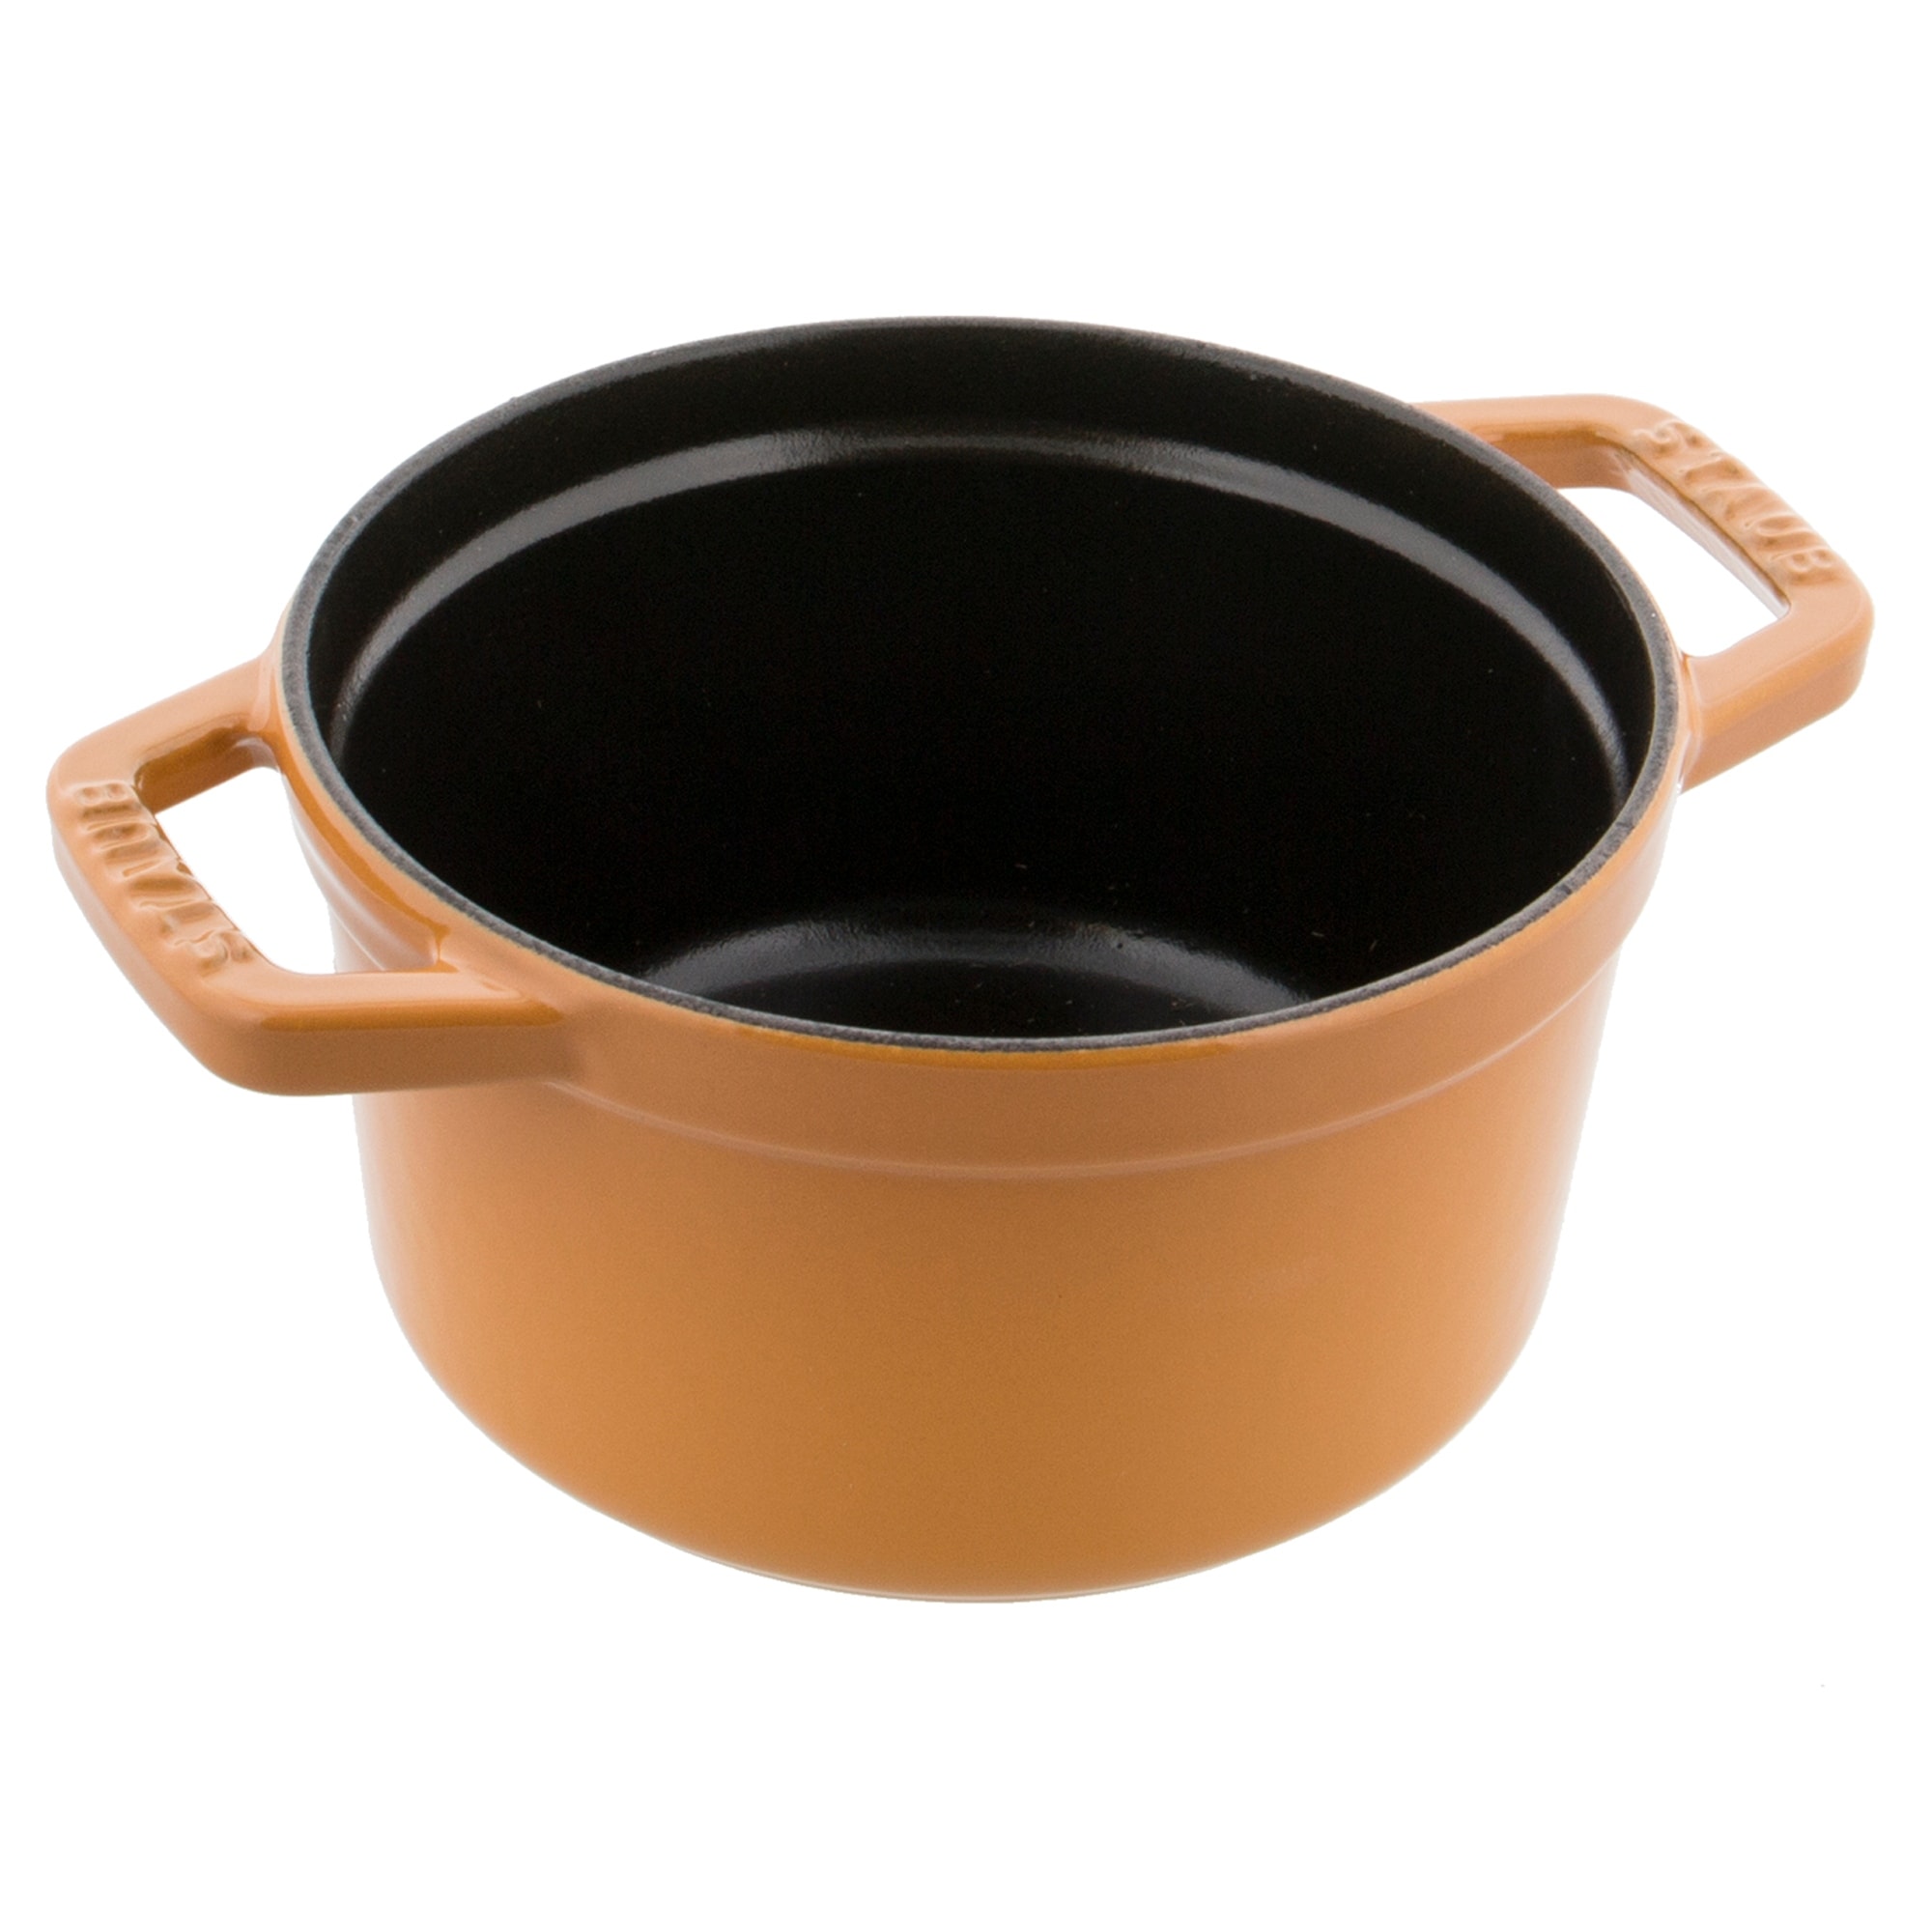 https://ak1.ostkcdn.com/images/products/is/images/direct/caea4e9bc878f1ba87803d35ce2c755a2425cc7b/Staub-Cast-Iron-0.75-qt-Round-Cocotte---Visual-Imperfections---Saffron.jpg